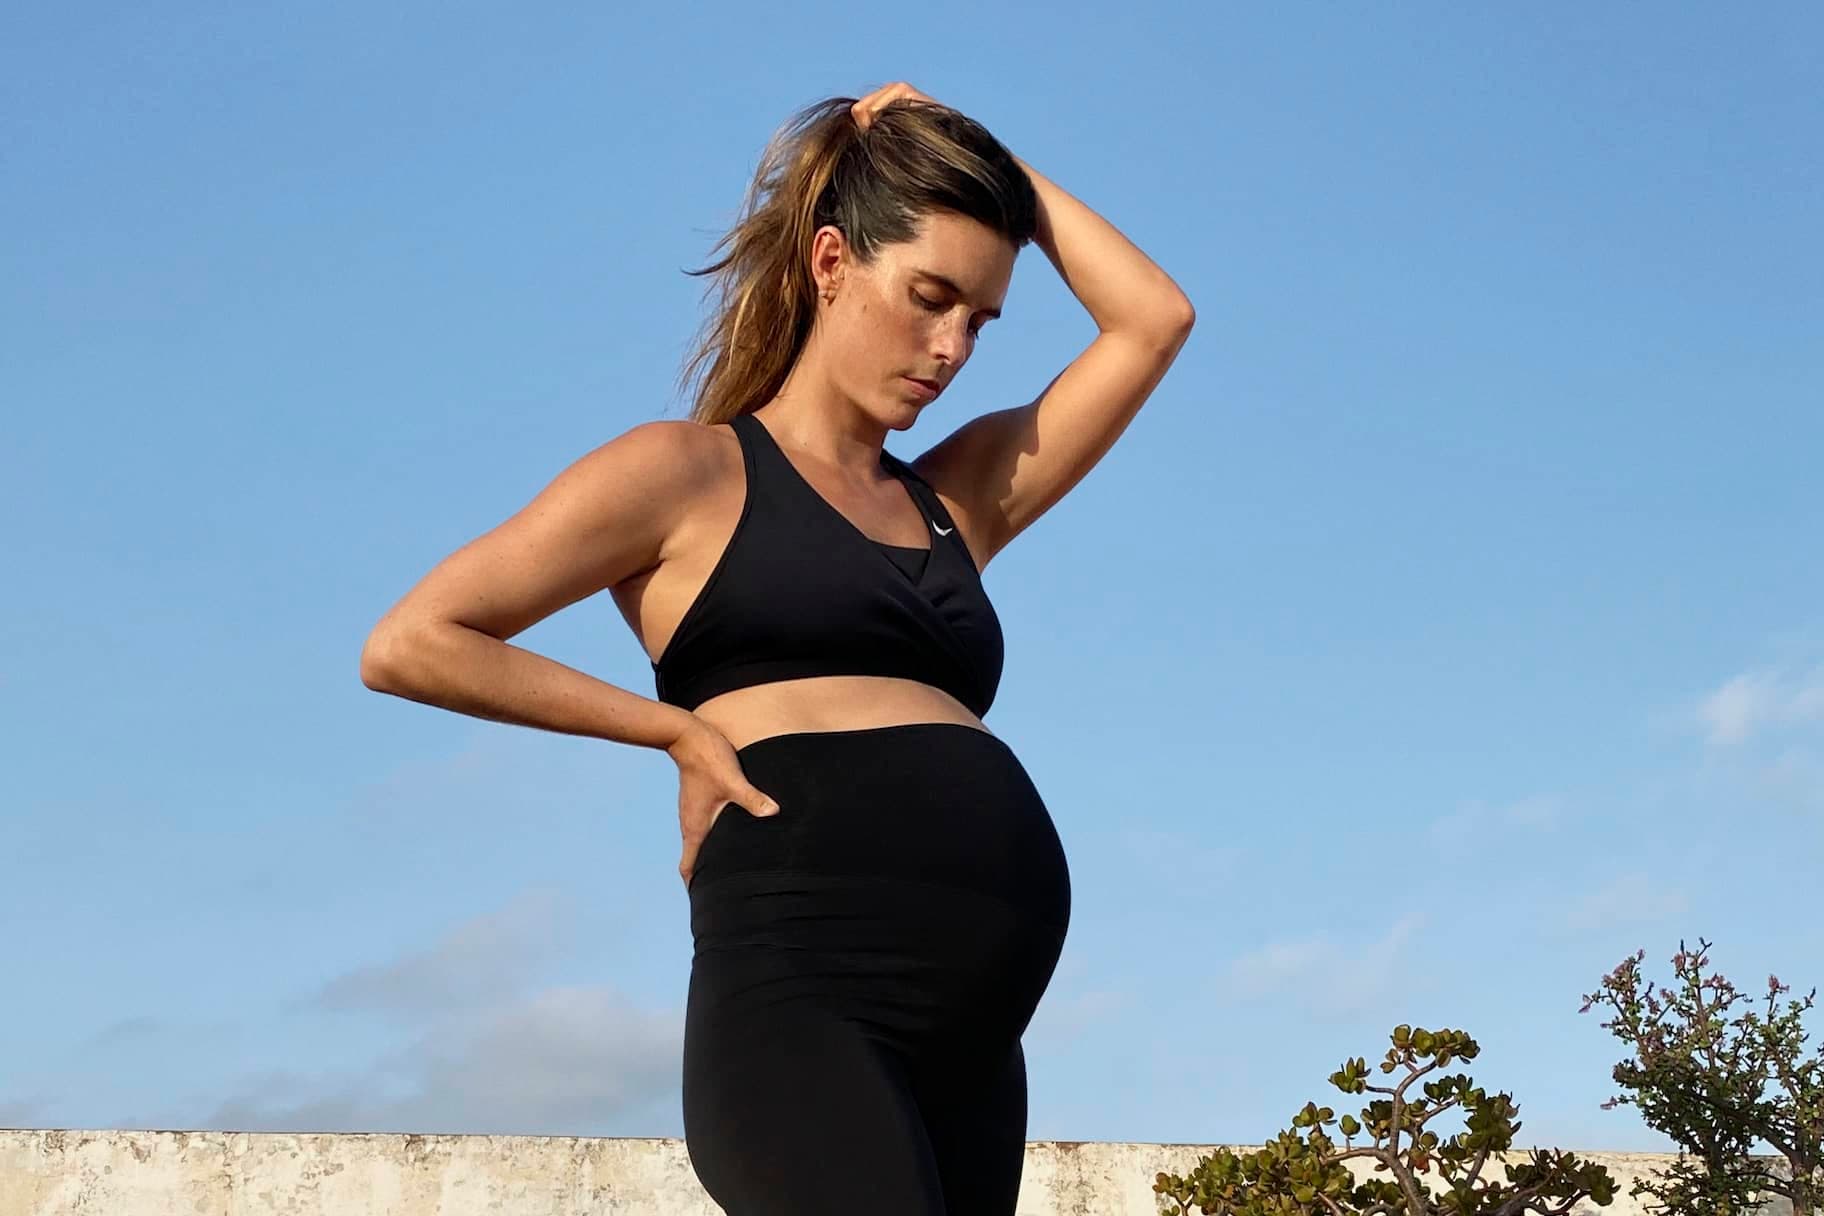 Maternity Yoga Clothes: What to Wear When Pregnant. Nike JP